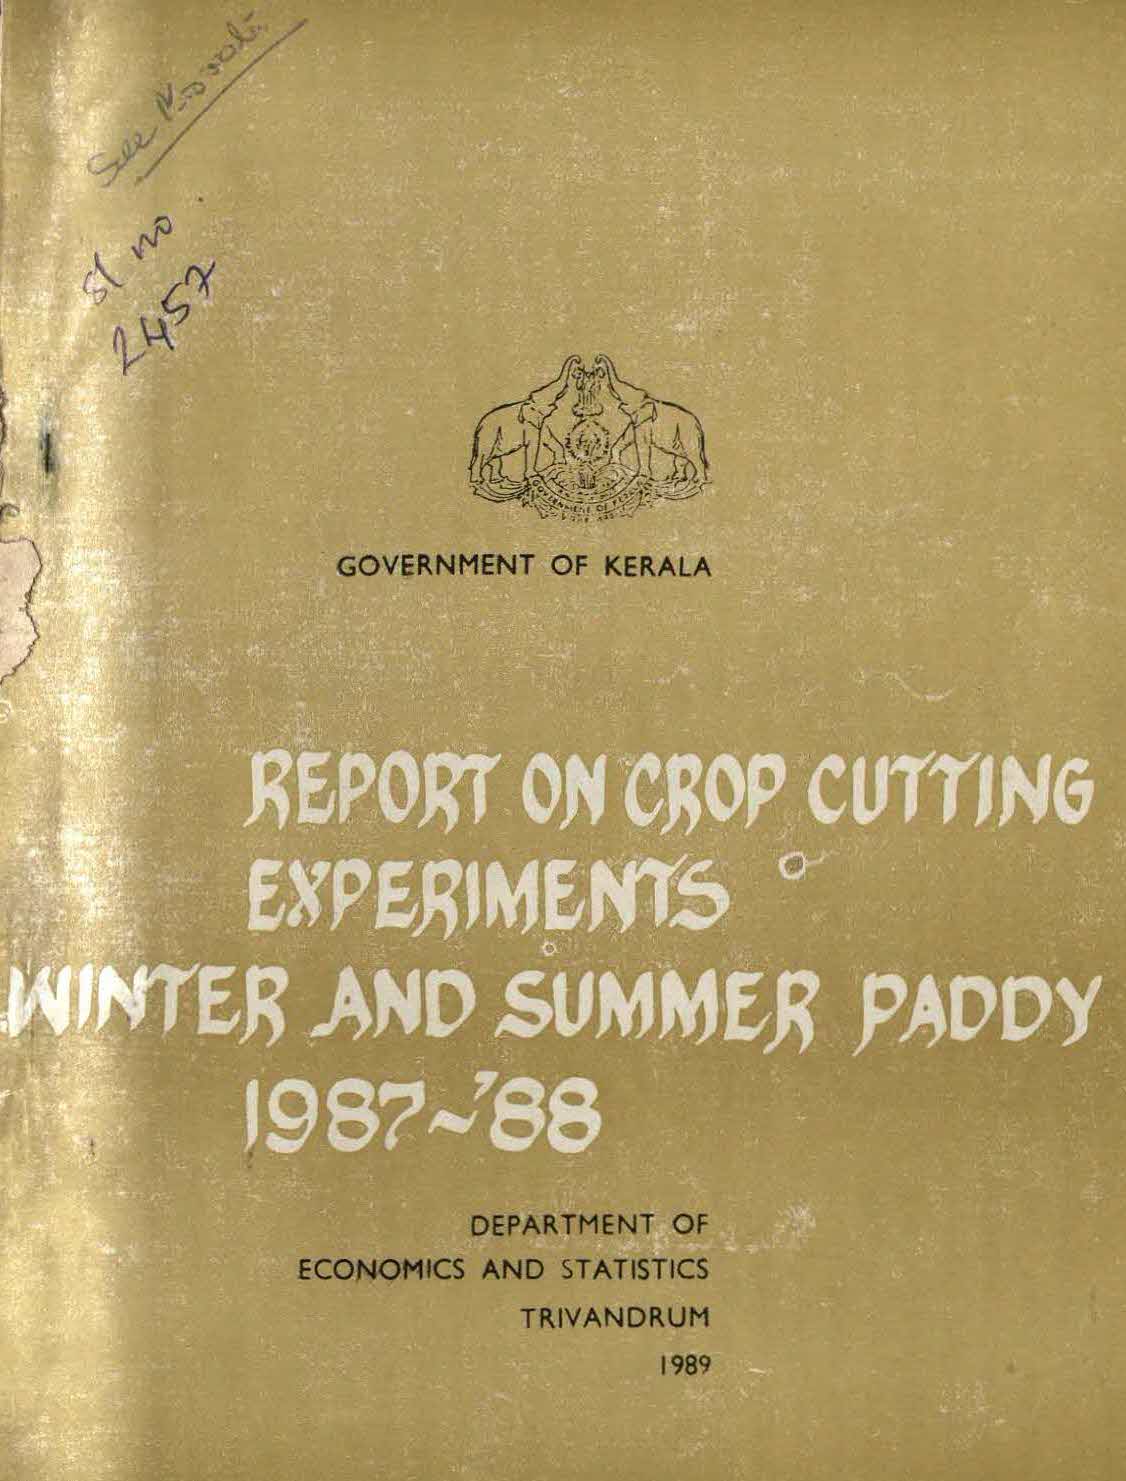 REPORT ON CROP CUTTING EXPERIMENTS WINTER AND SUMMER PADDY 1987-88